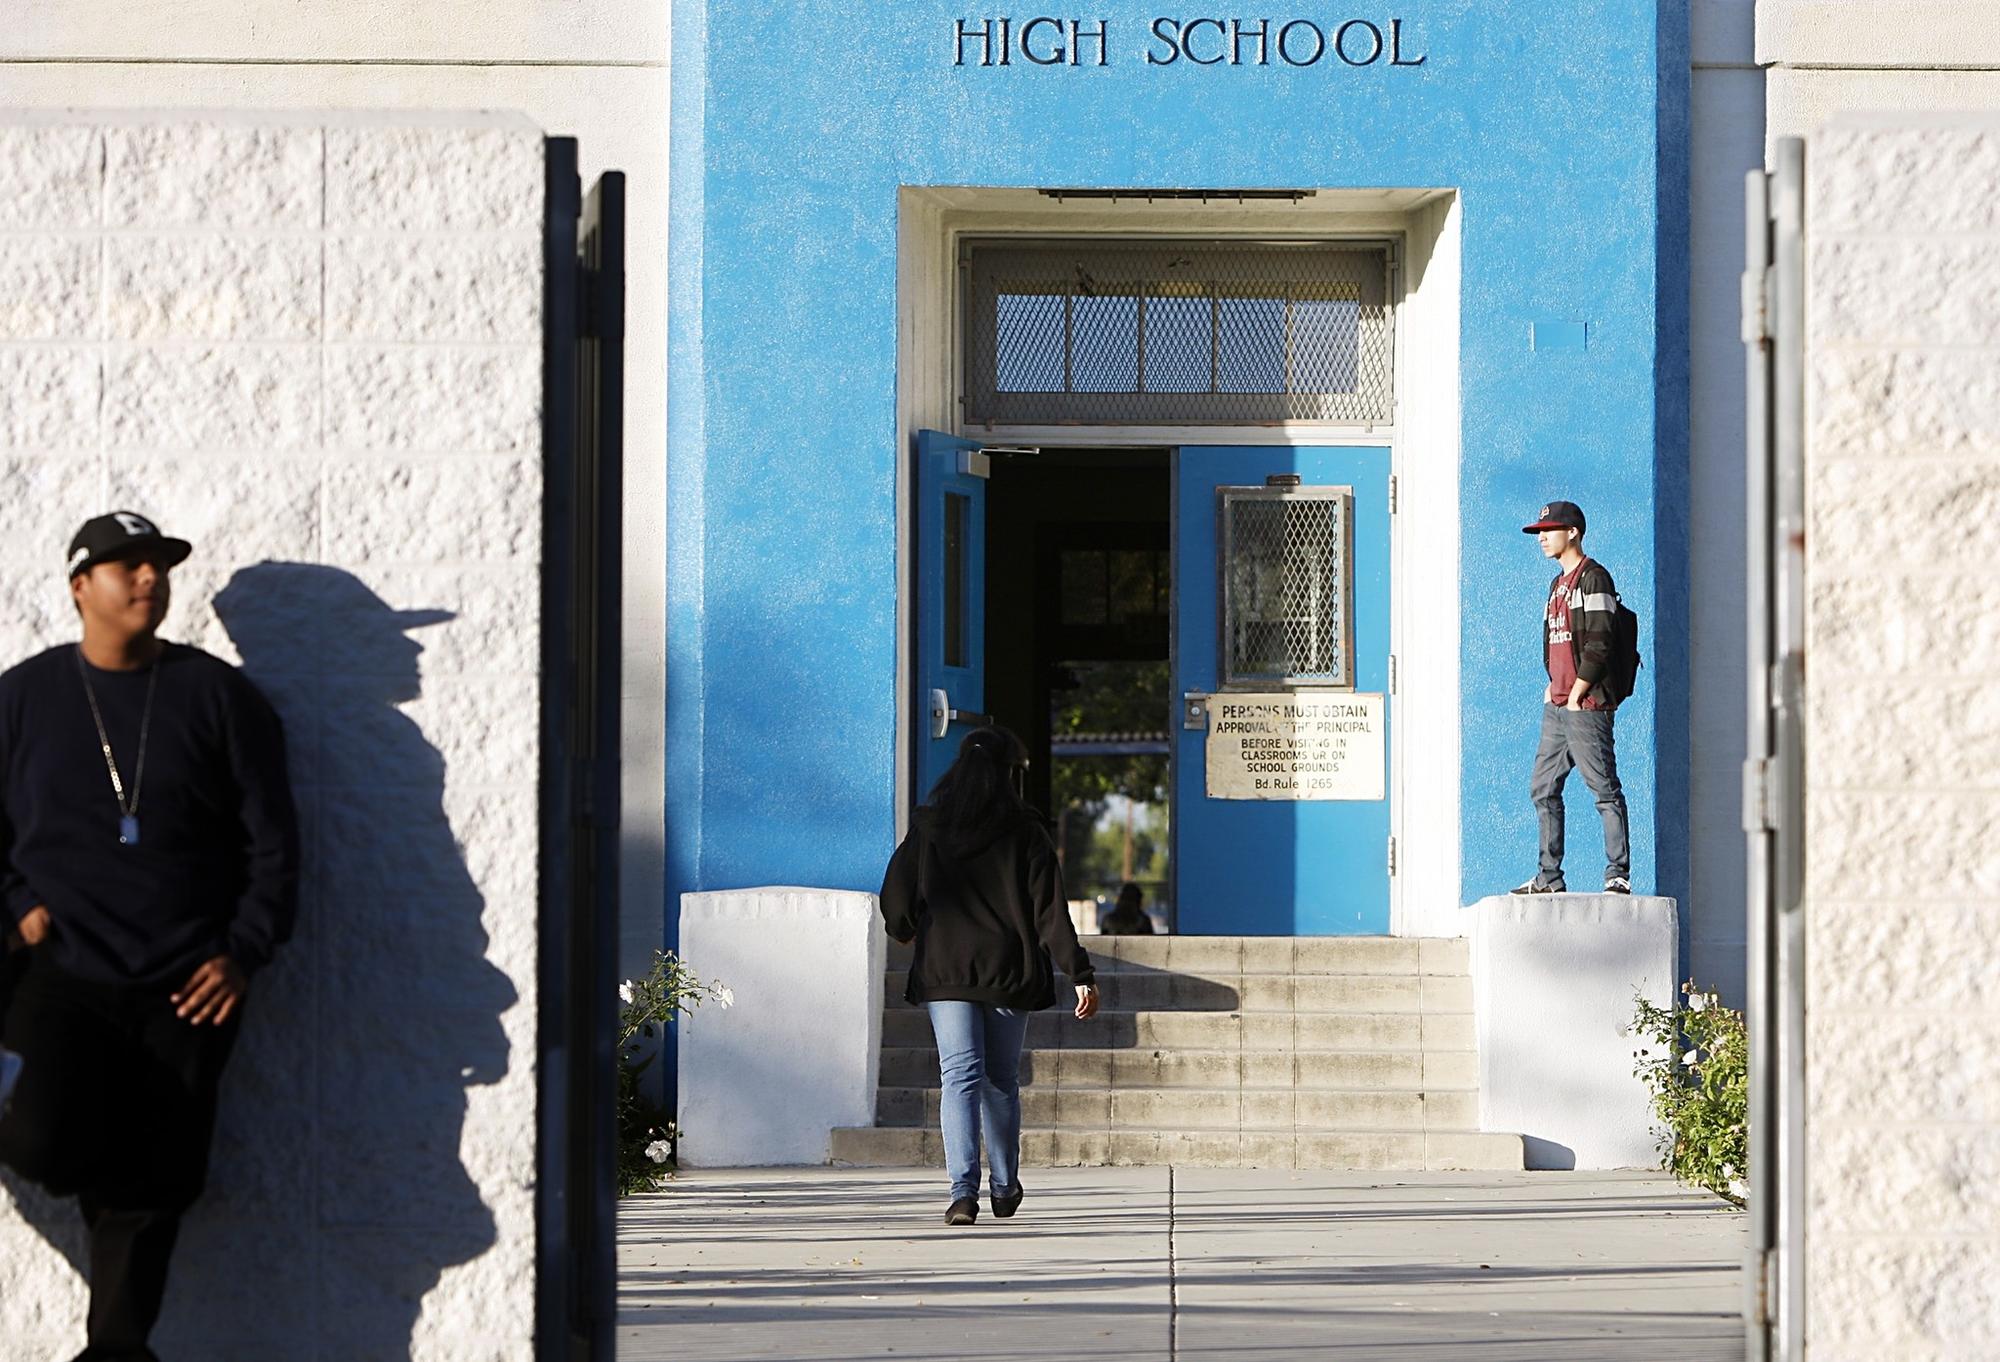 Jordan High School was split into Green Dot, a charter school, and a school run by the Partnership for Los Angeles Schools.